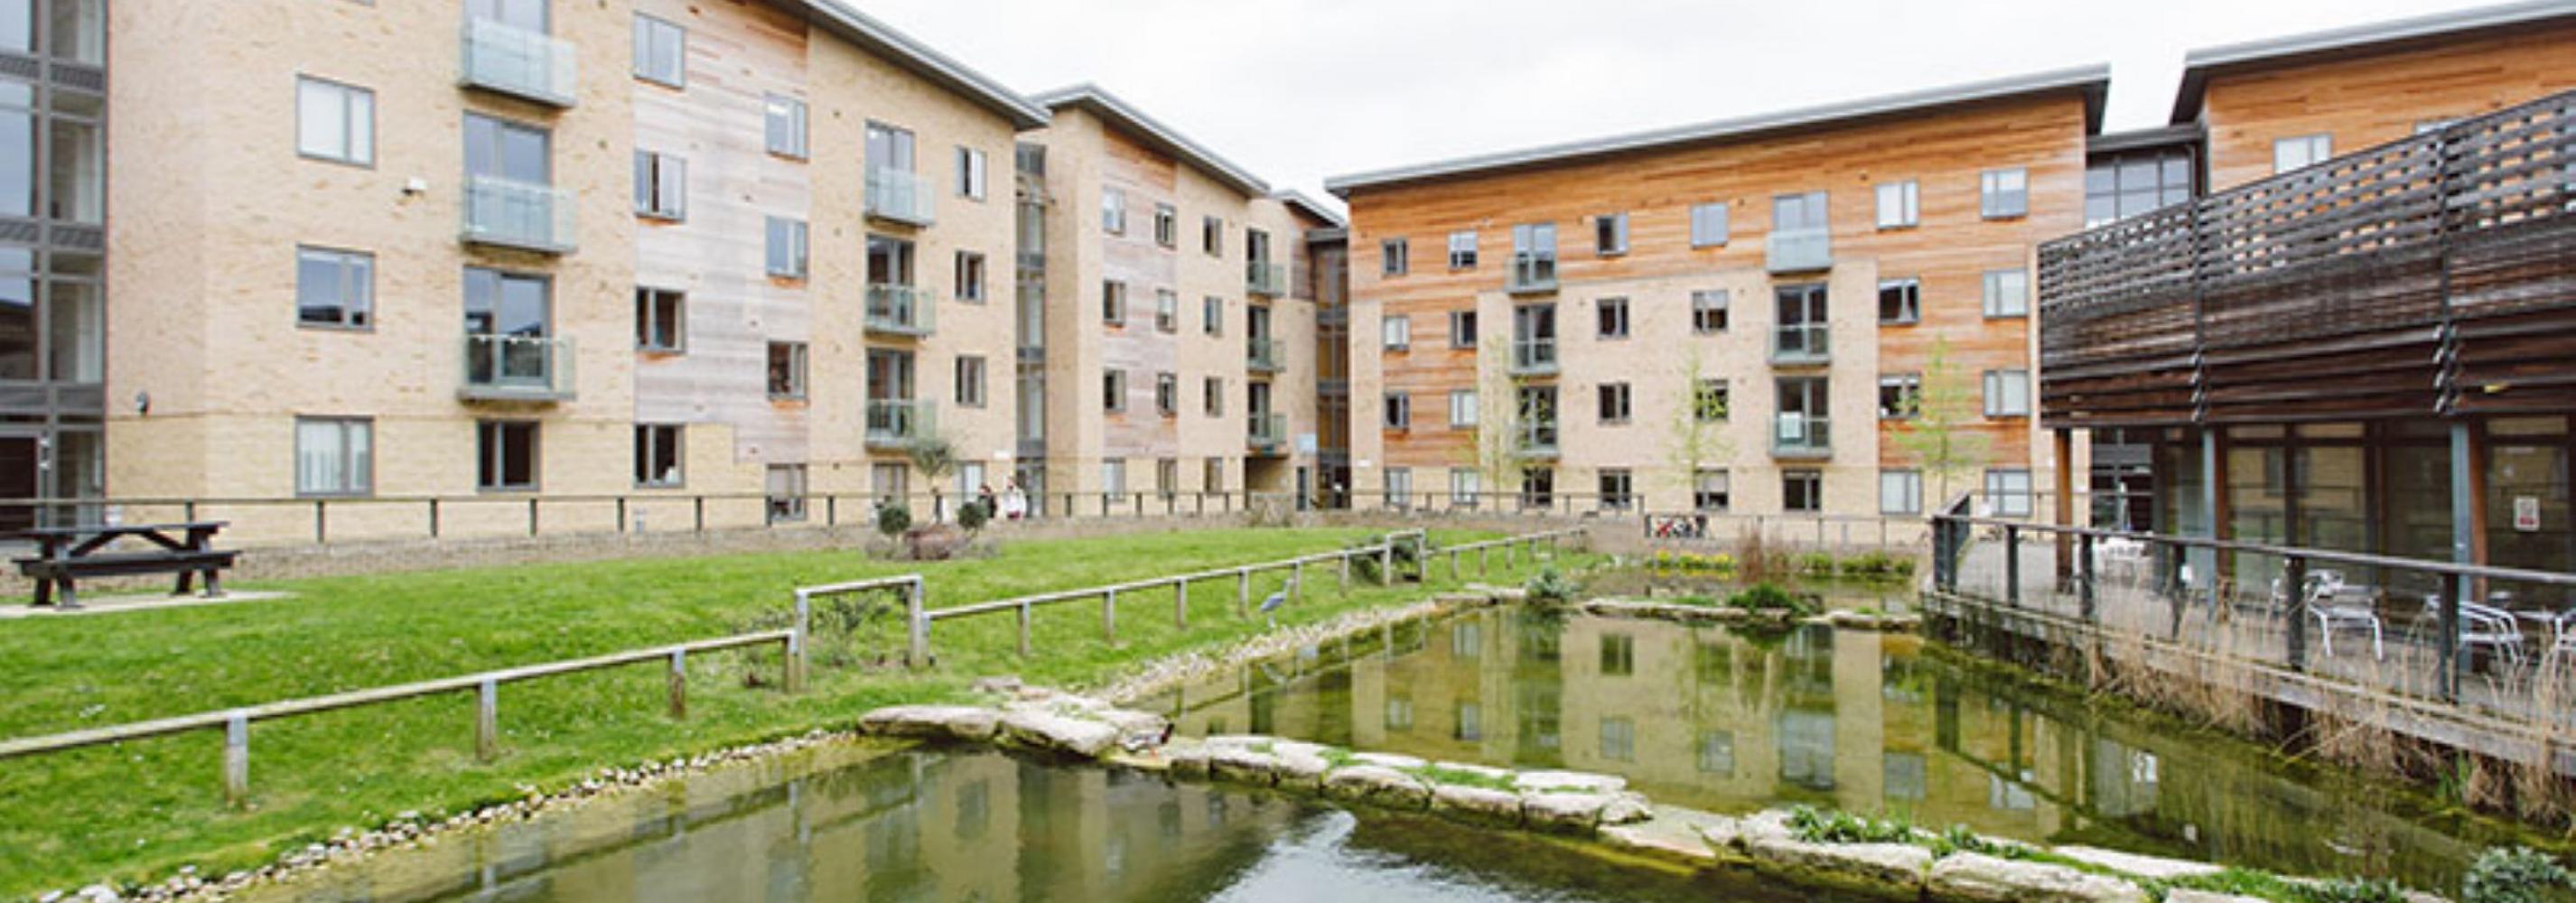 Modern four story accommodation blocks surrounding a lake and grass areas.